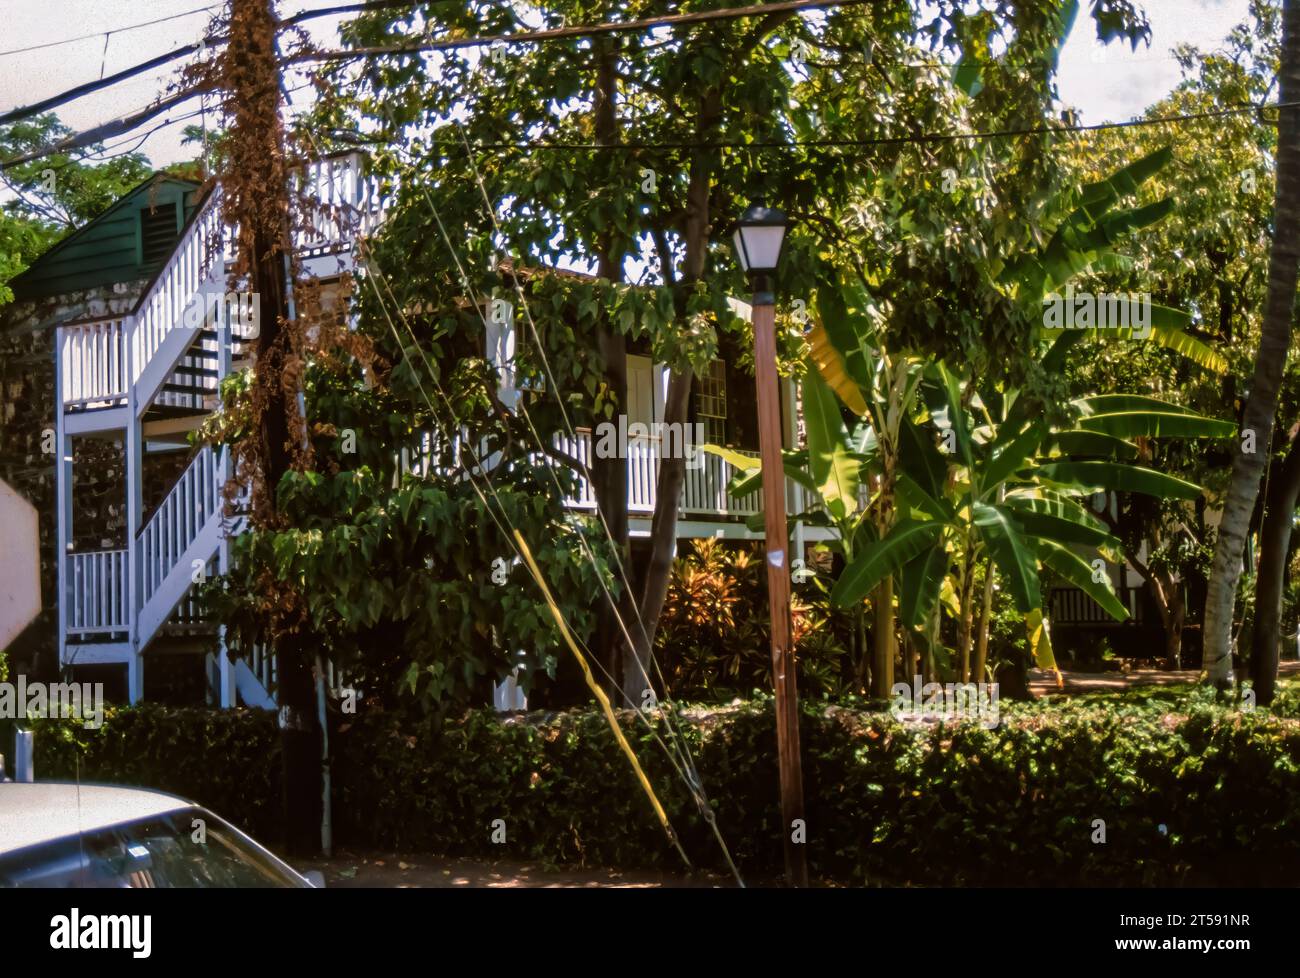 Lahaina, Maui, Hawaii, June 2, 1989 - Old Slide of Historic Site, the Baldwin Home in Lahaina Harbor, on a Beautiful Sunny Summer Day Stock Photo